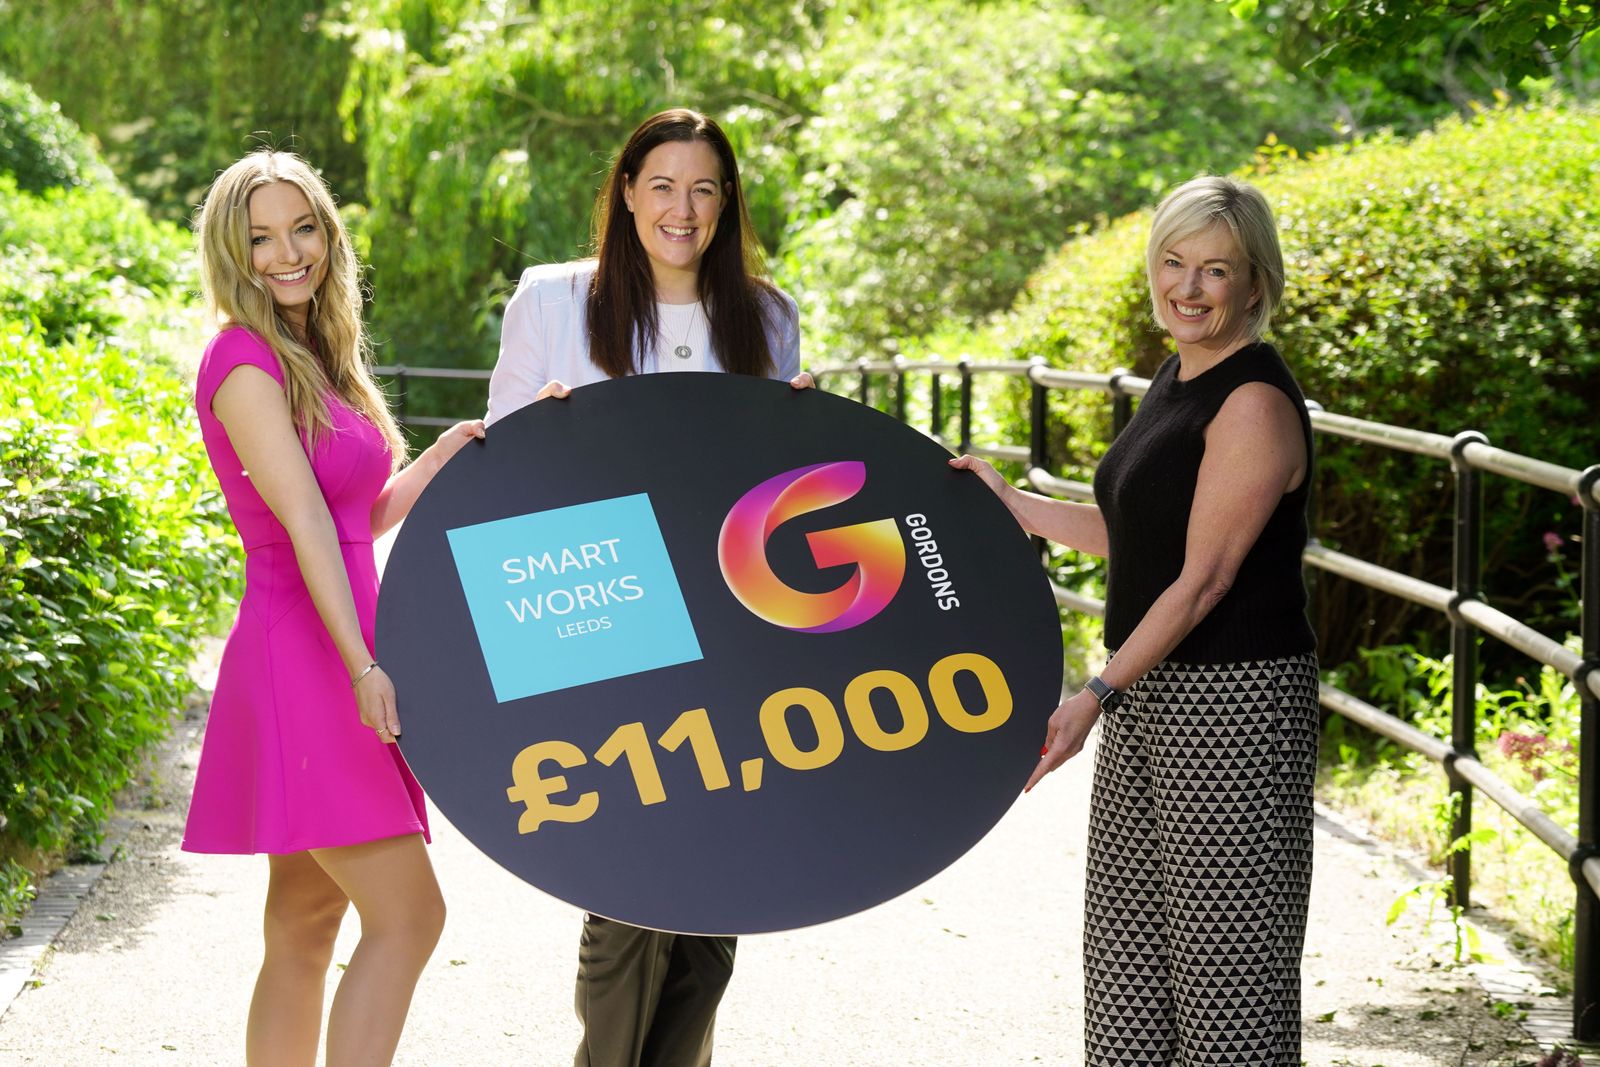 Law firm raises £11,000 for Smart Works Leeds